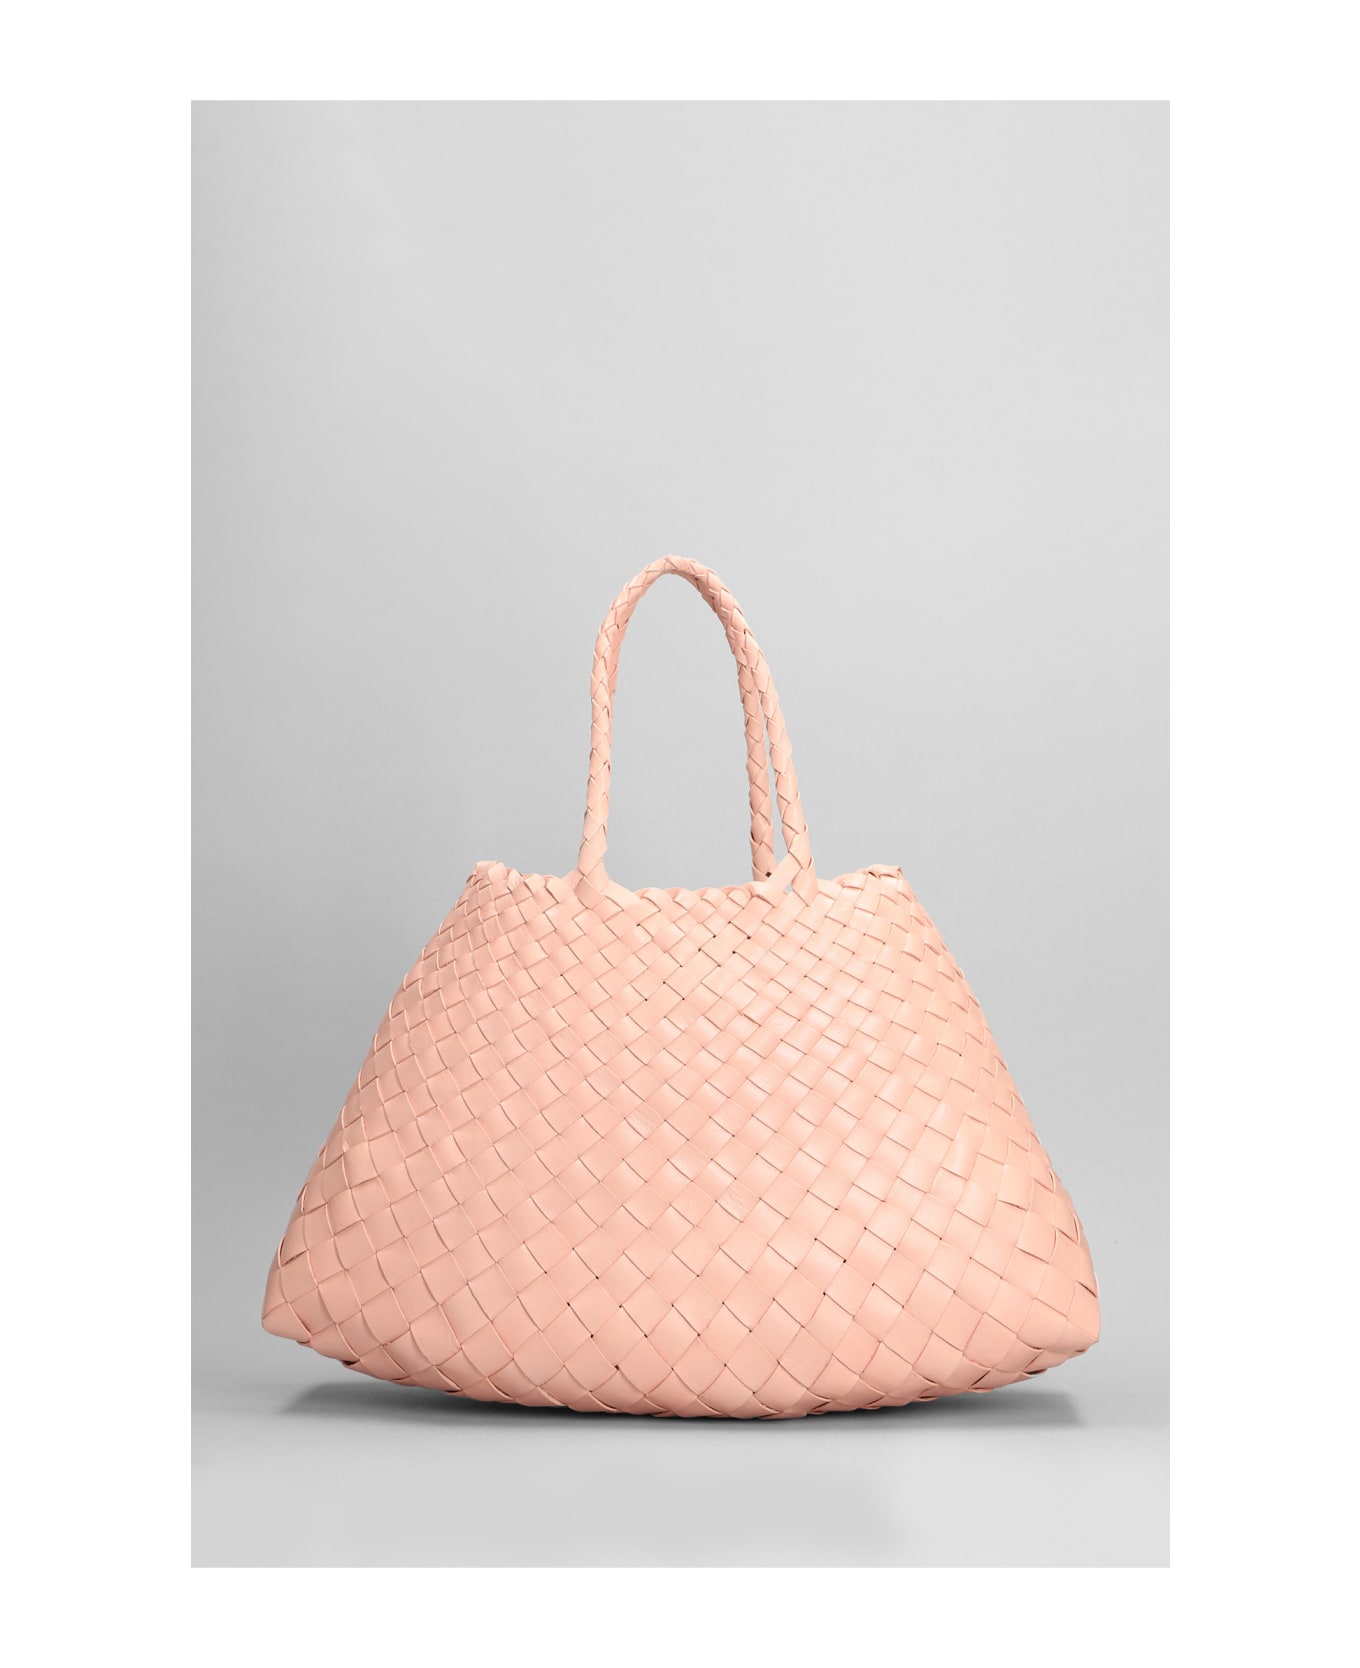 Dragon Diffusion Santa Croce Small Hand Bag In Rose-pink Leather - rose-pink